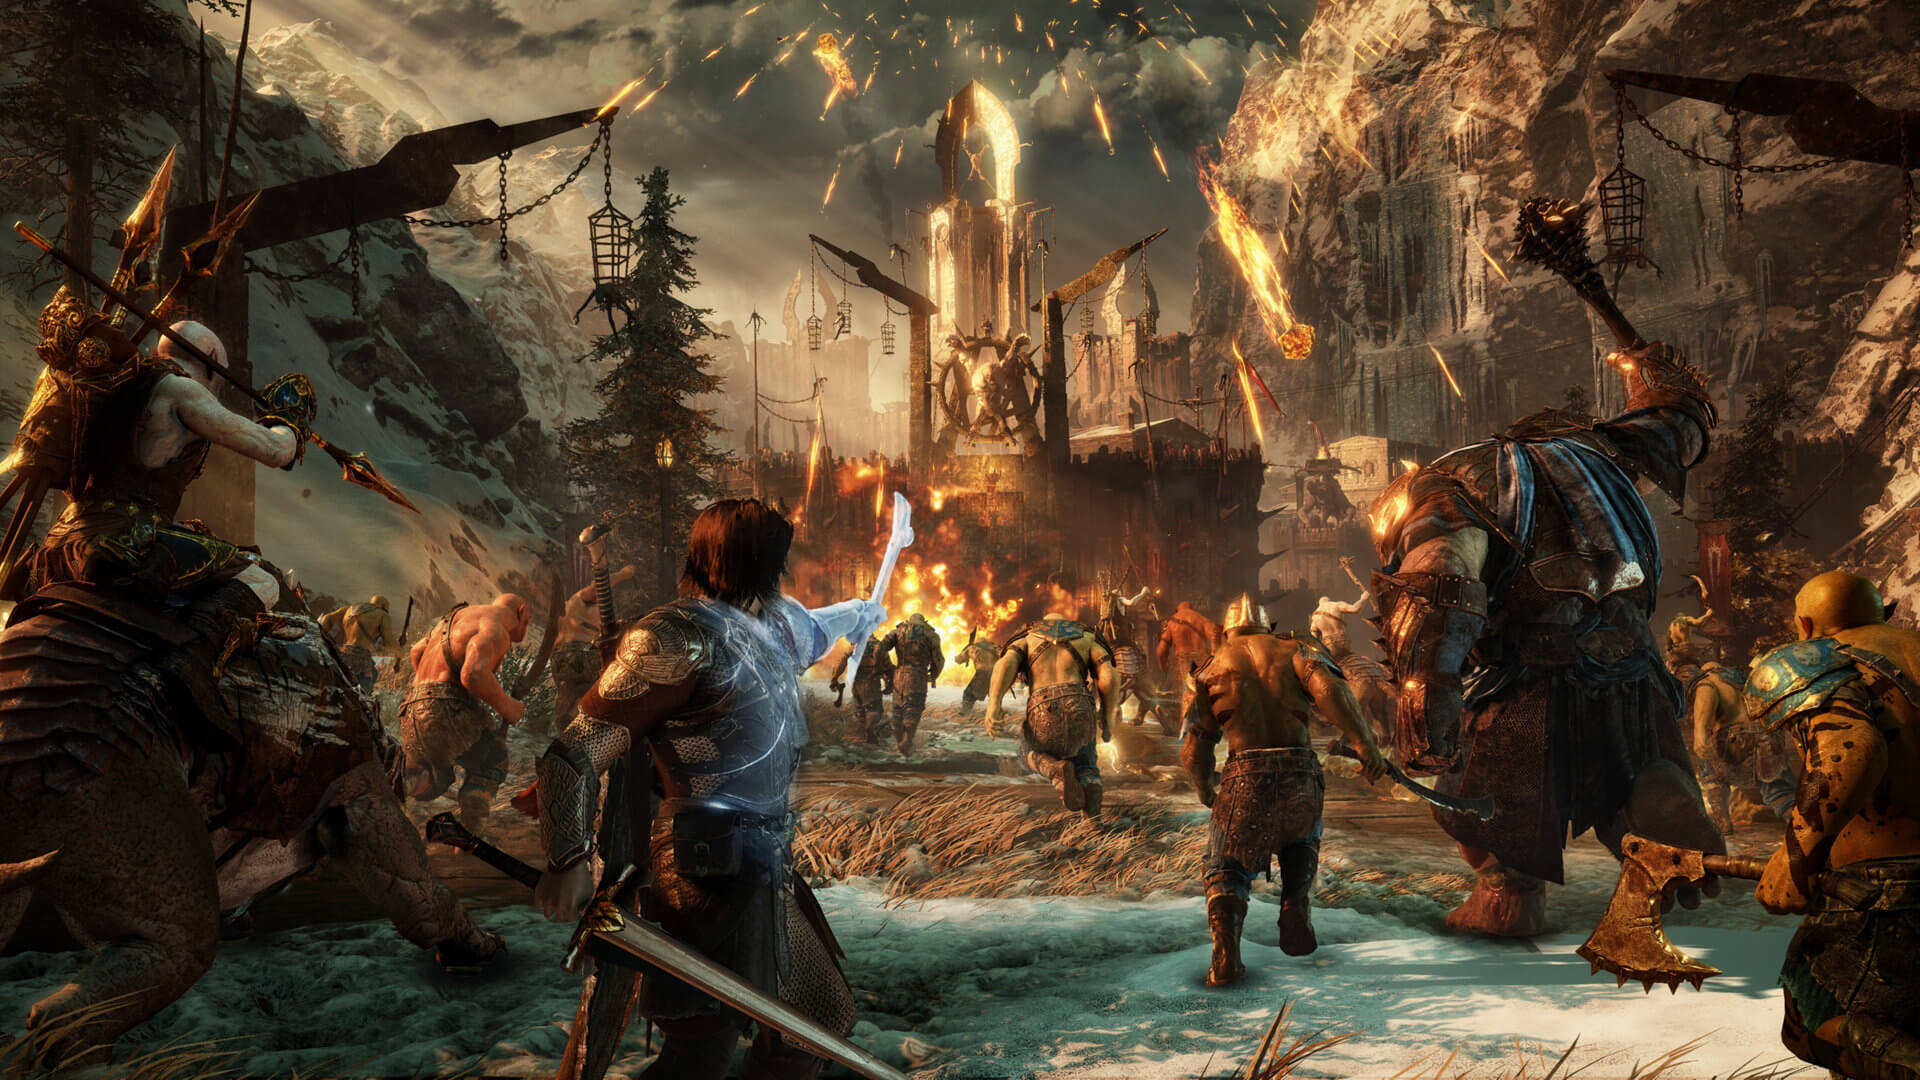 The Complete Middle Earth: Shadow of War Preorder Guide